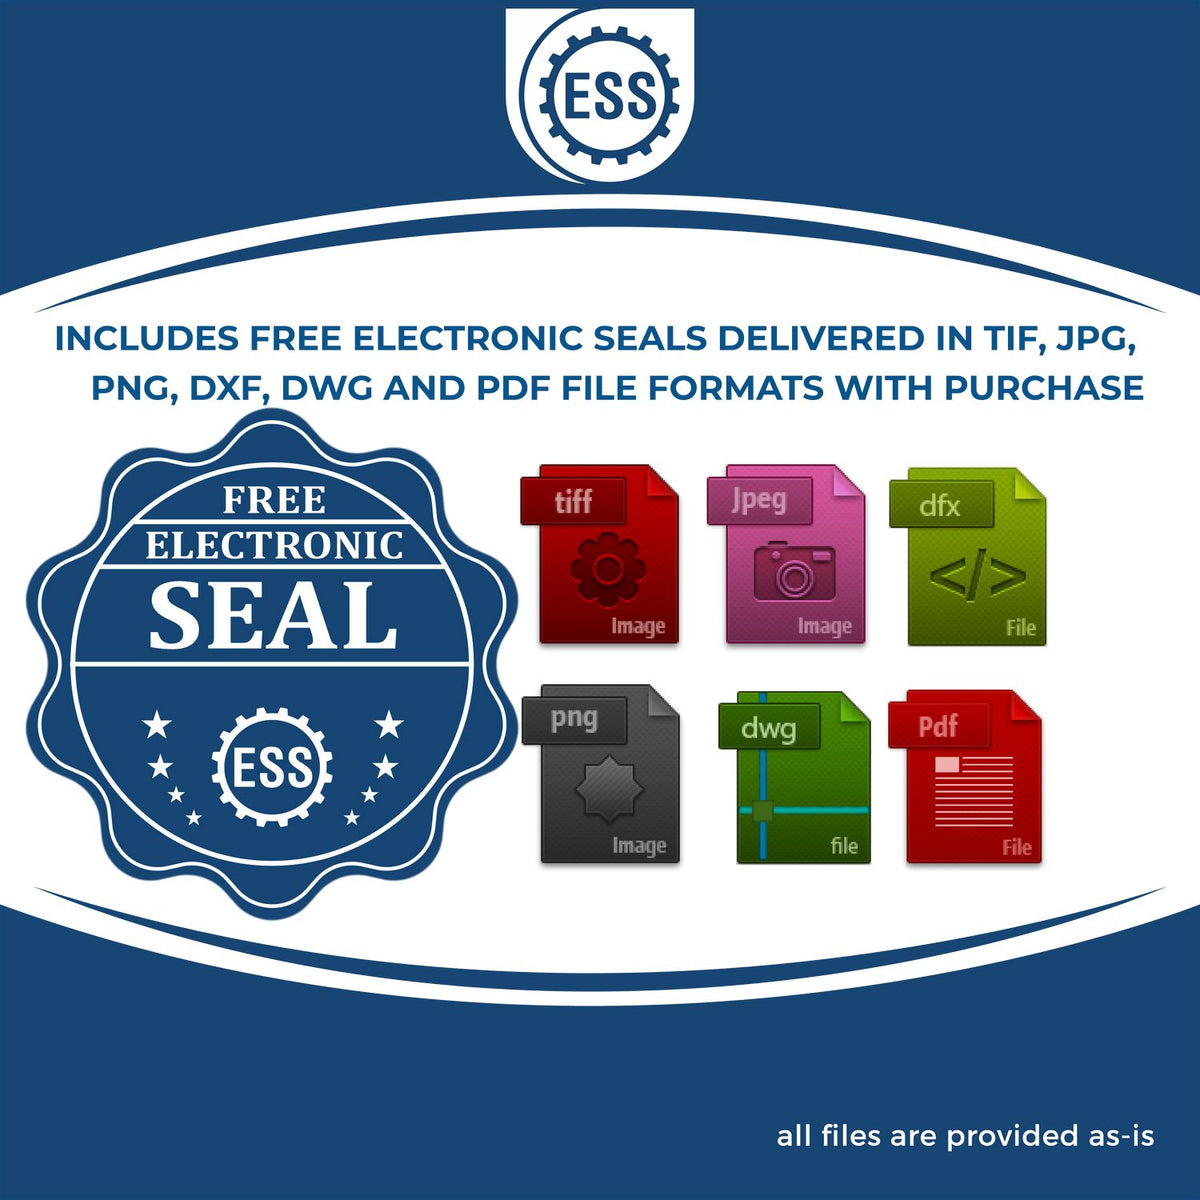 An infographic for the free electronic seal for the Indiana Geologist Desk Seal illustrating the different file type icons such as DXF, DWG, TIF, JPG and PNG.